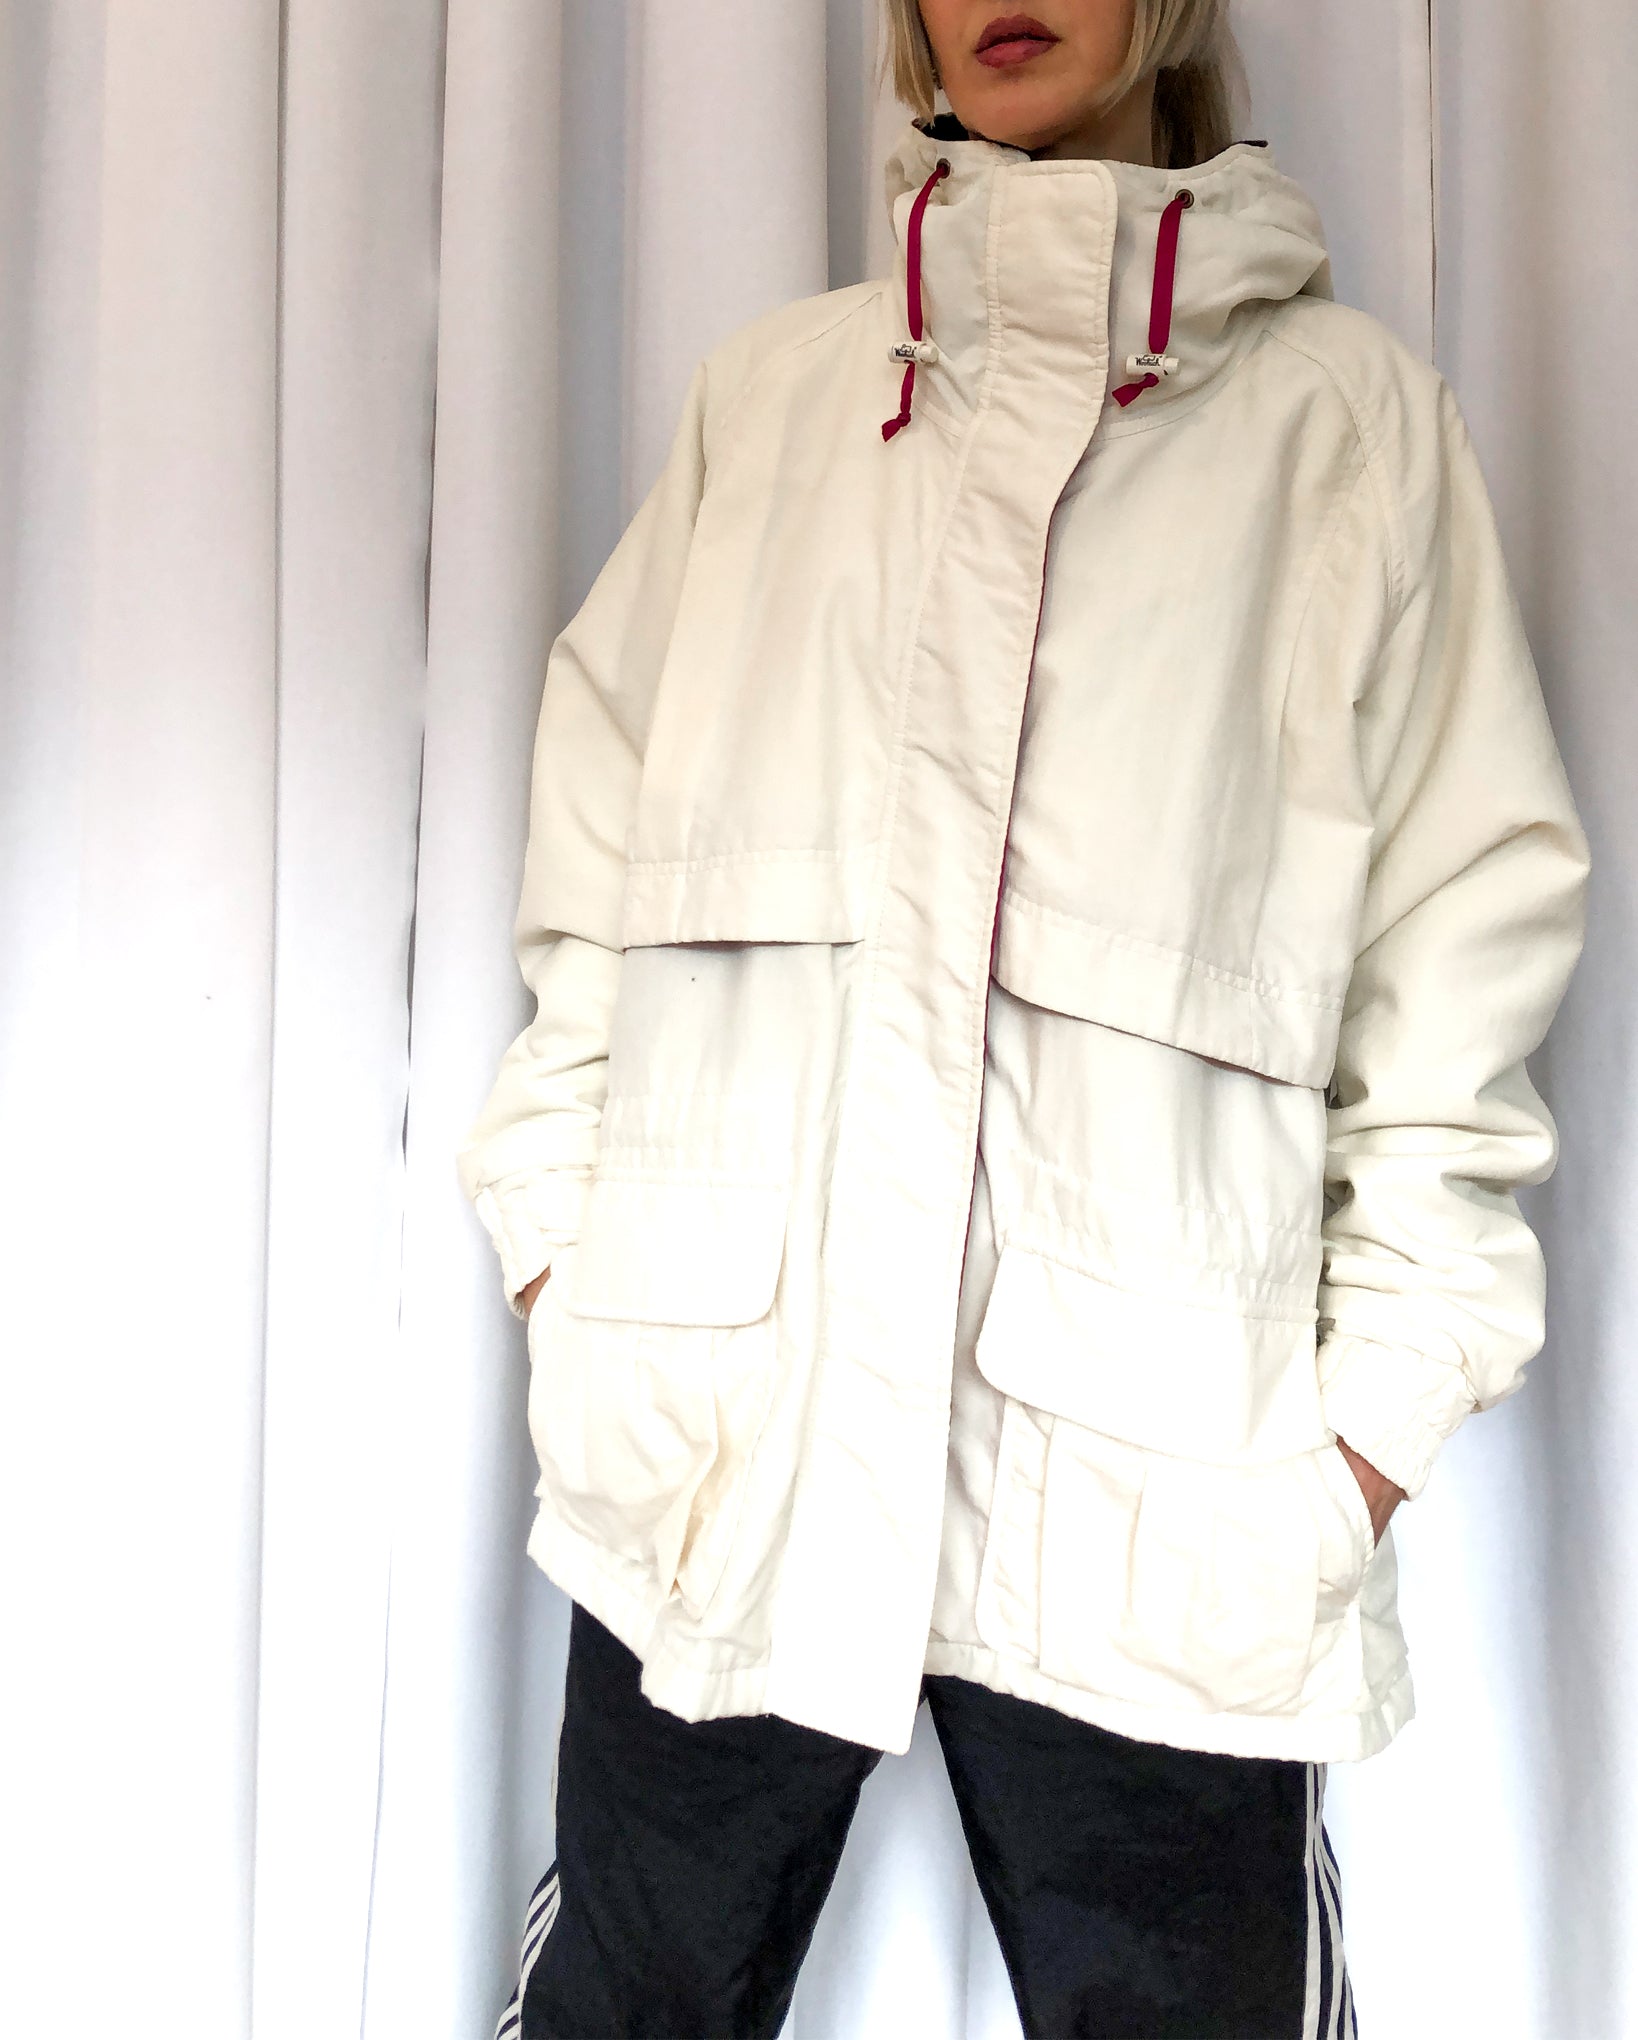 Vintage 90s Woolrich White Anorak Jacket With Wool Lining